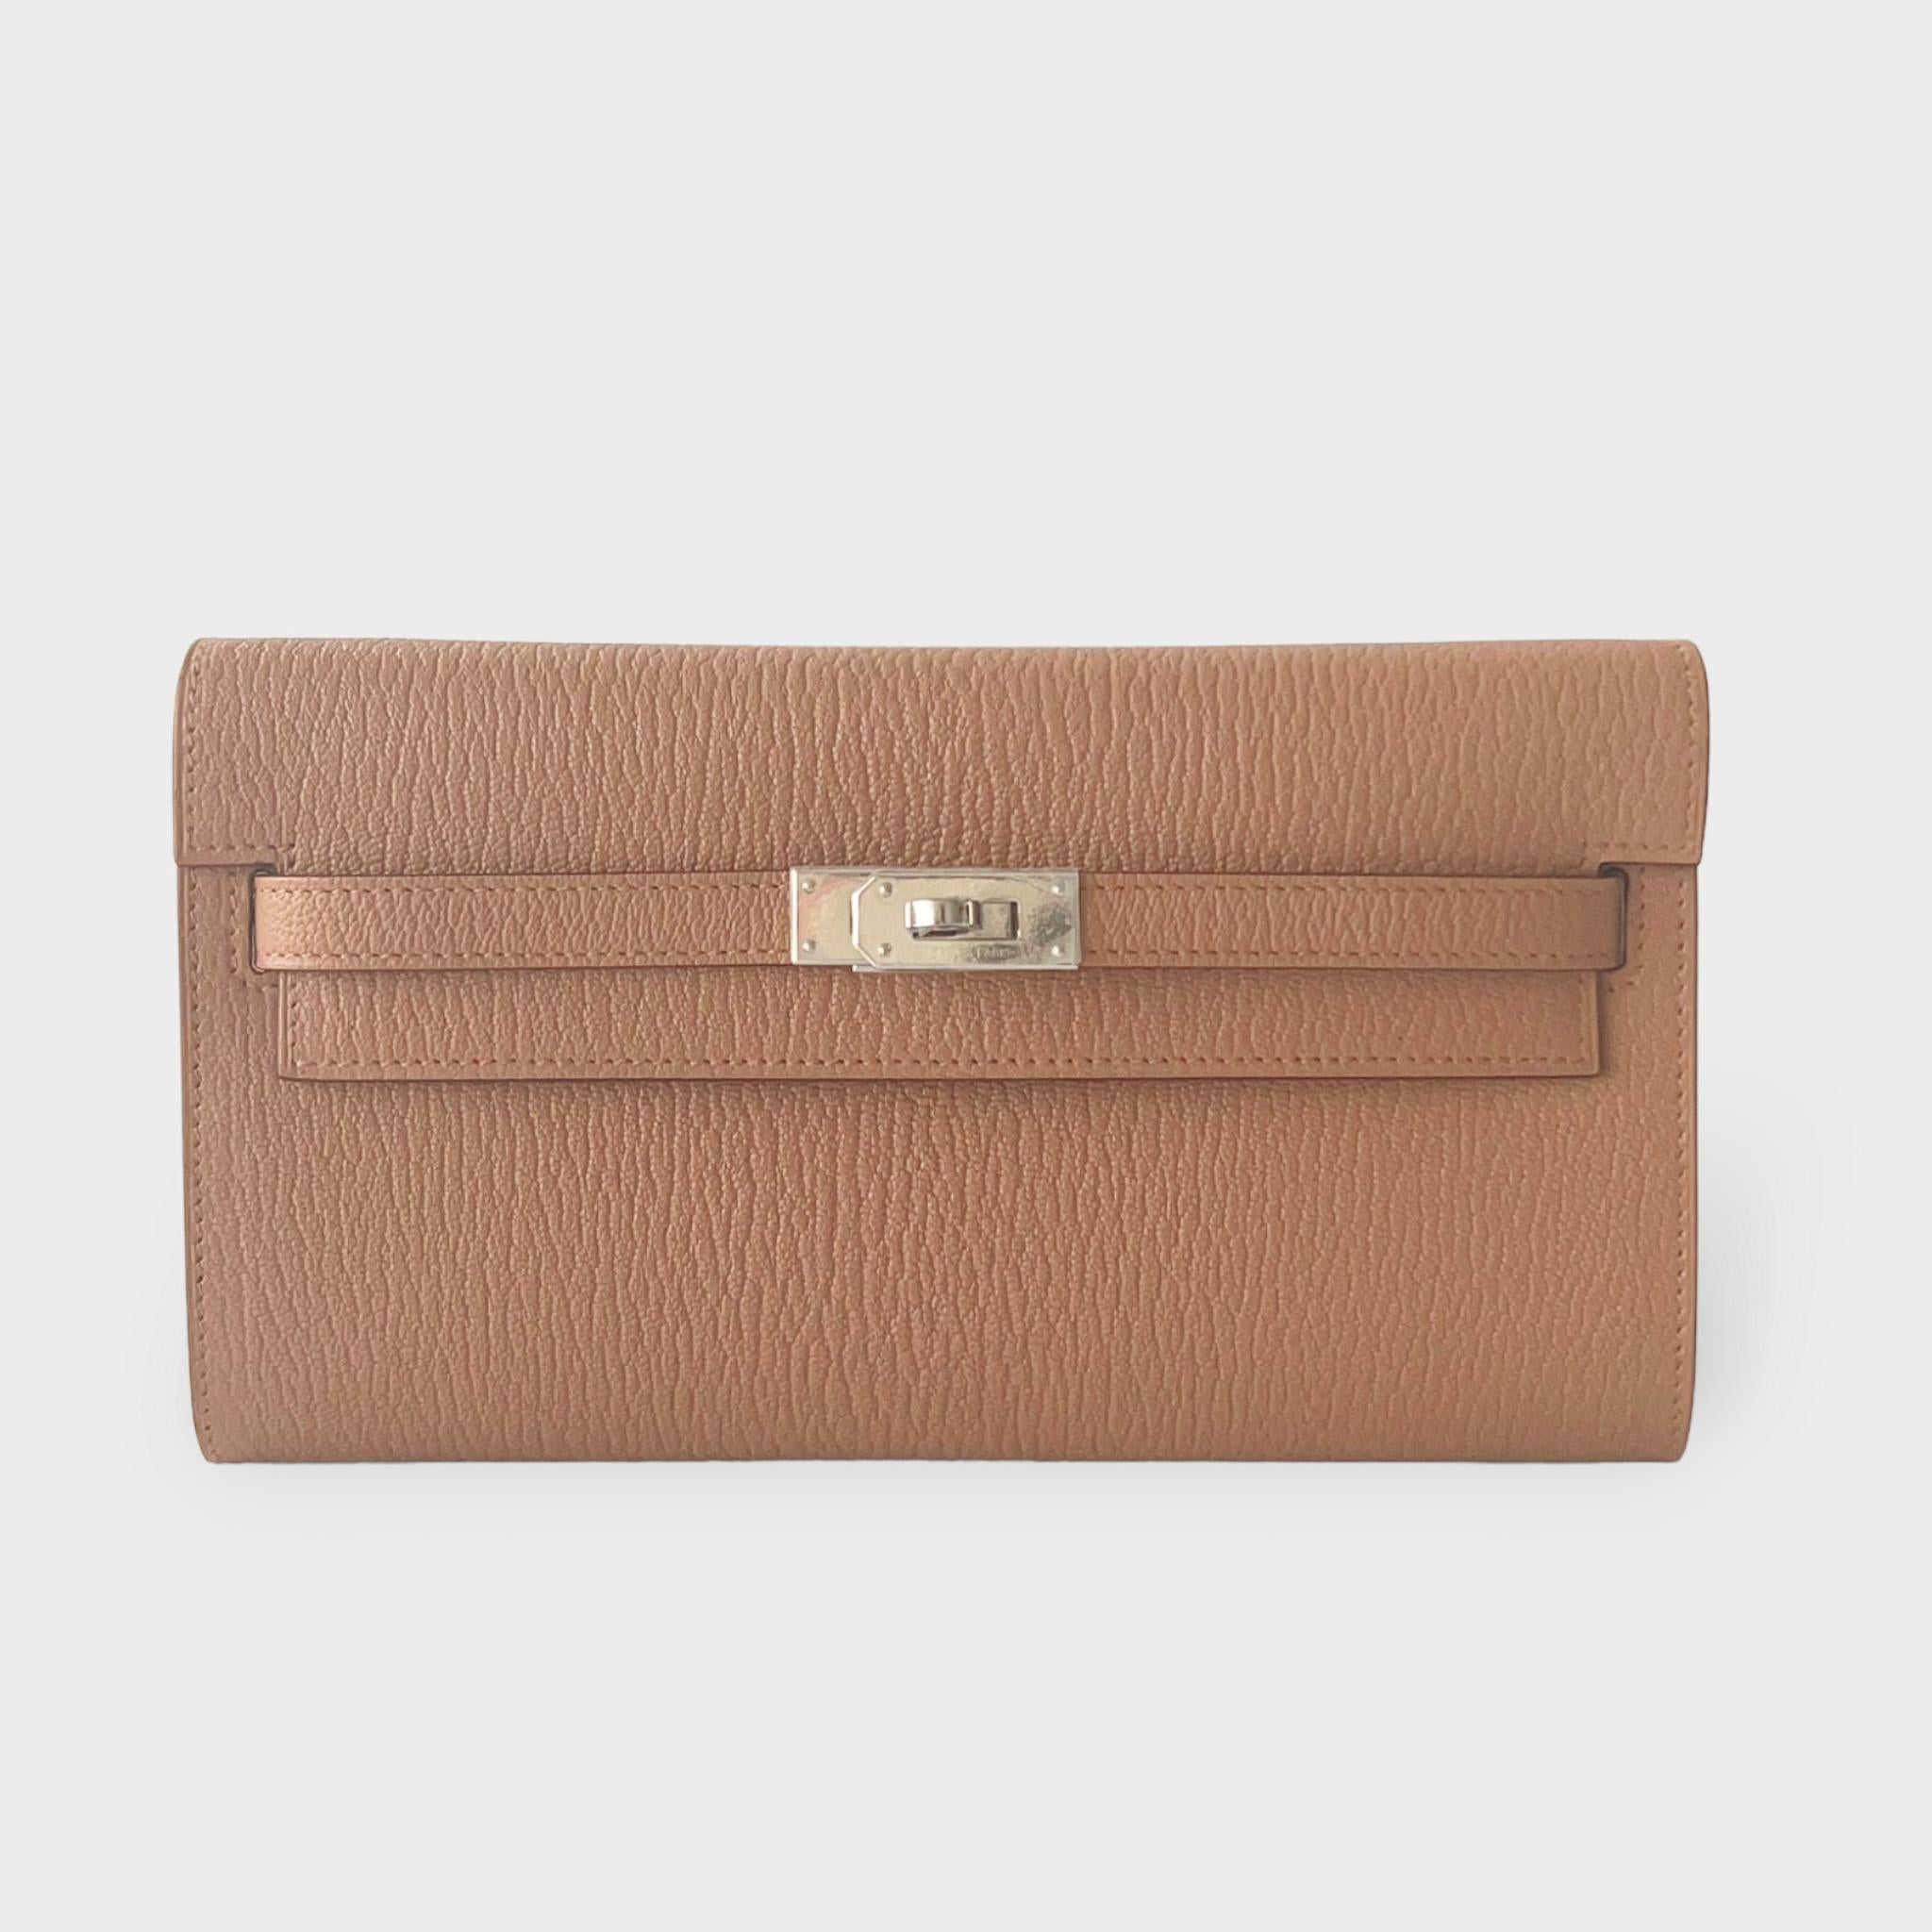 Shop this eye catching Hermes Kelly Classique To Go Wallet, In Quebracho, a light brown that is complimented with Palladium Hardware. It is crafted in Mysore Goatskin Leather and comes with a strap which makes the wallet usable as both a clutch and